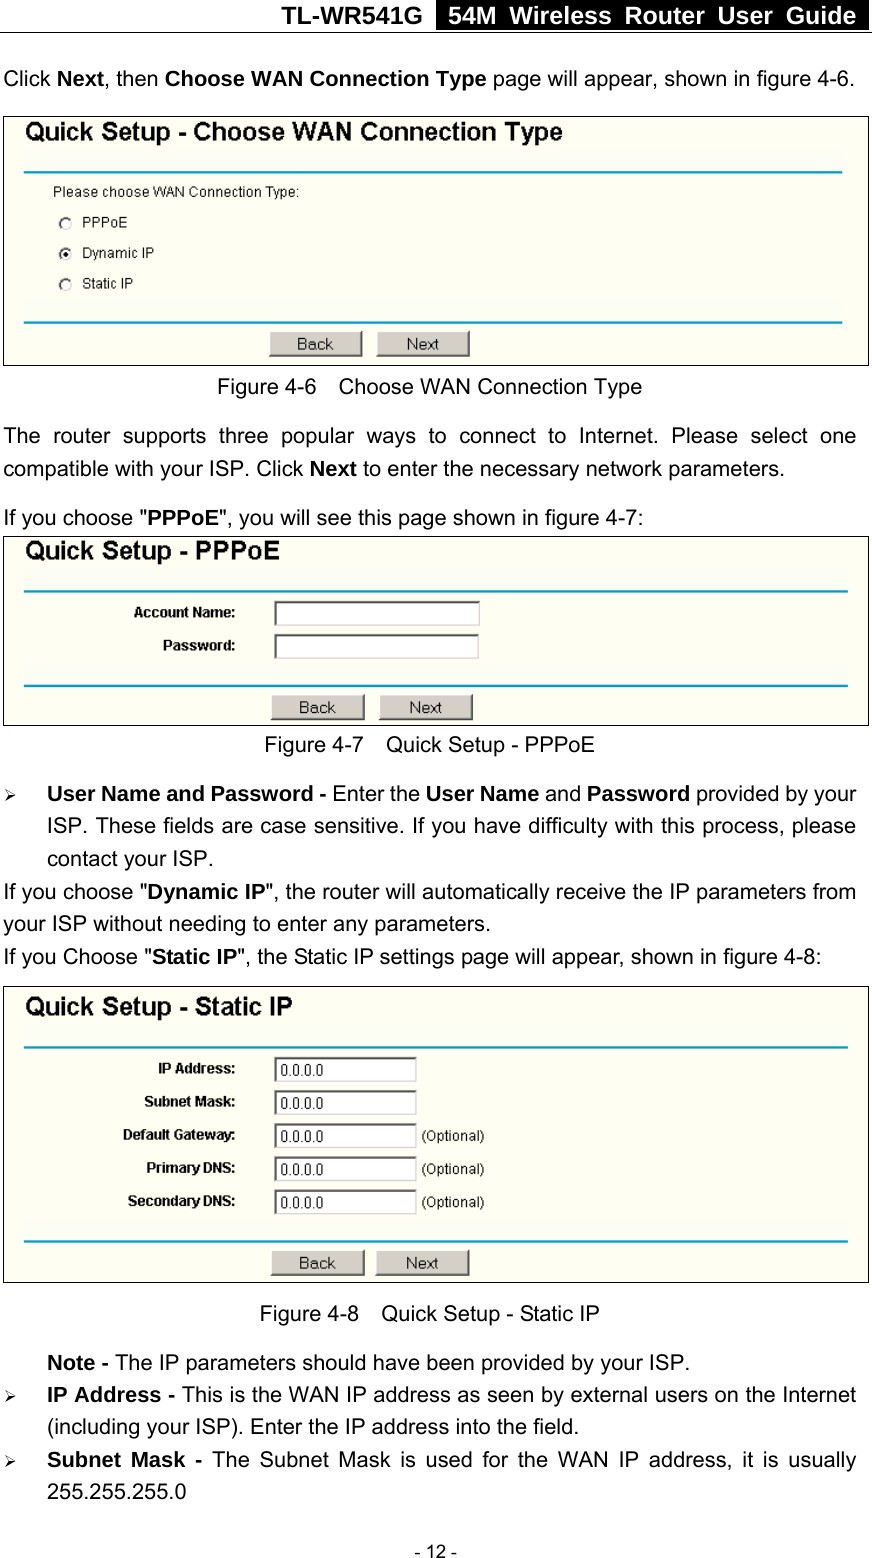 TL-WR541G   54M Wireless Router User Guide  Click Next, then Choose WAN Connection Type page will appear, shown in figure 4-6.  Figure 4-6    Choose WAN Connection Type The router supports three popular ways to connect to Internet. Please select one compatible with your ISP. Click Next to enter the necessary network parameters. If you choose &quot;PPPoE&quot;, you will see this page shown in figure 4-7:    Figure 4-7    Quick Setup - PPPoE ¾ User Name and Password - Enter the User Name and Password provided by your ISP. These fields are case sensitive. If you have difficulty with this process, please contact your ISP. If you choose &quot;Dynamic IP&quot;, the router will automatically receive the IP parameters from your ISP without needing to enter any parameters. If you Choose &quot;Static IP&quot;, the Static IP settings page will appear, shown in figure 4-8:    Figure 4-8    Quick Setup - Static IP  Note - The IP parameters should have been provided by your ISP. ¾ IP Address - This is the WAN IP address as seen by external users on the Internet (including your ISP). Enter the IP address into the field. ¾ Subnet Mask - The Subnet Mask is used for the WAN IP address, it is usually 255.255.255.0  - 12 - 